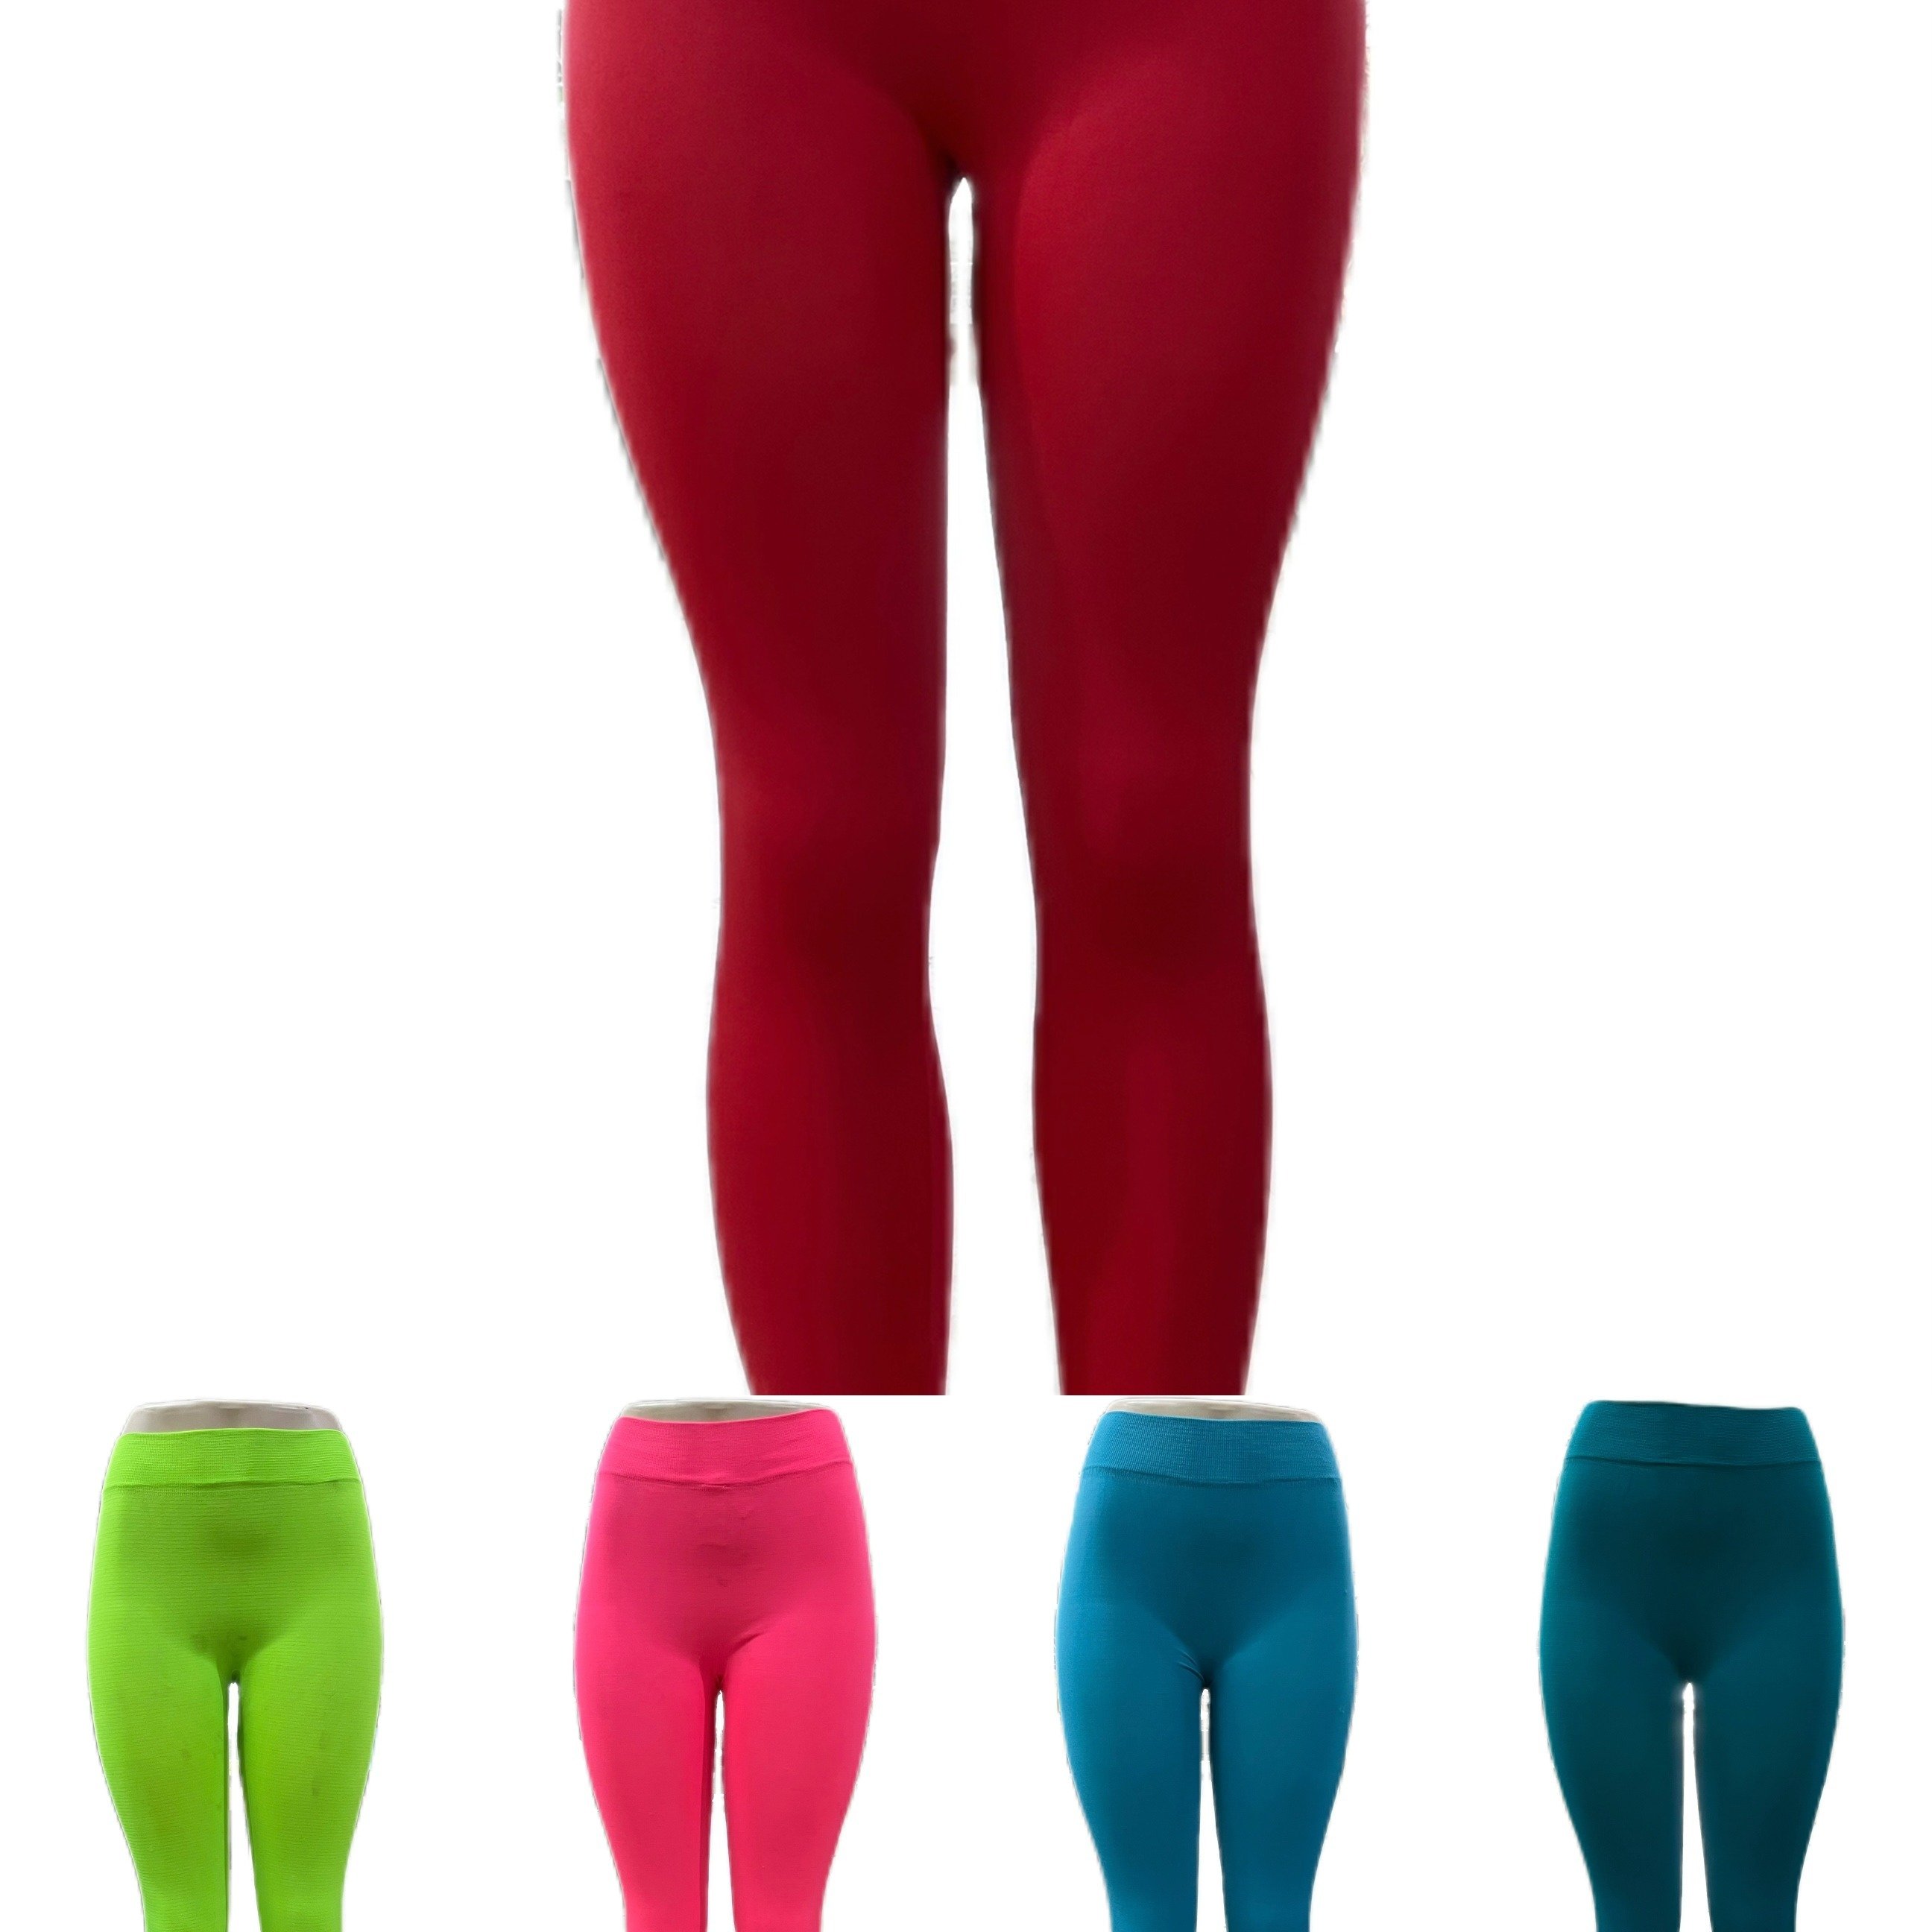 

12 Pieces 1086 High Waist Plain Yoga Leggings - Comfortable Casual Sweatpants - Stretchable, Moisture-wicking For Fitness & Everyday Style Mixed Colors 12 Pieces